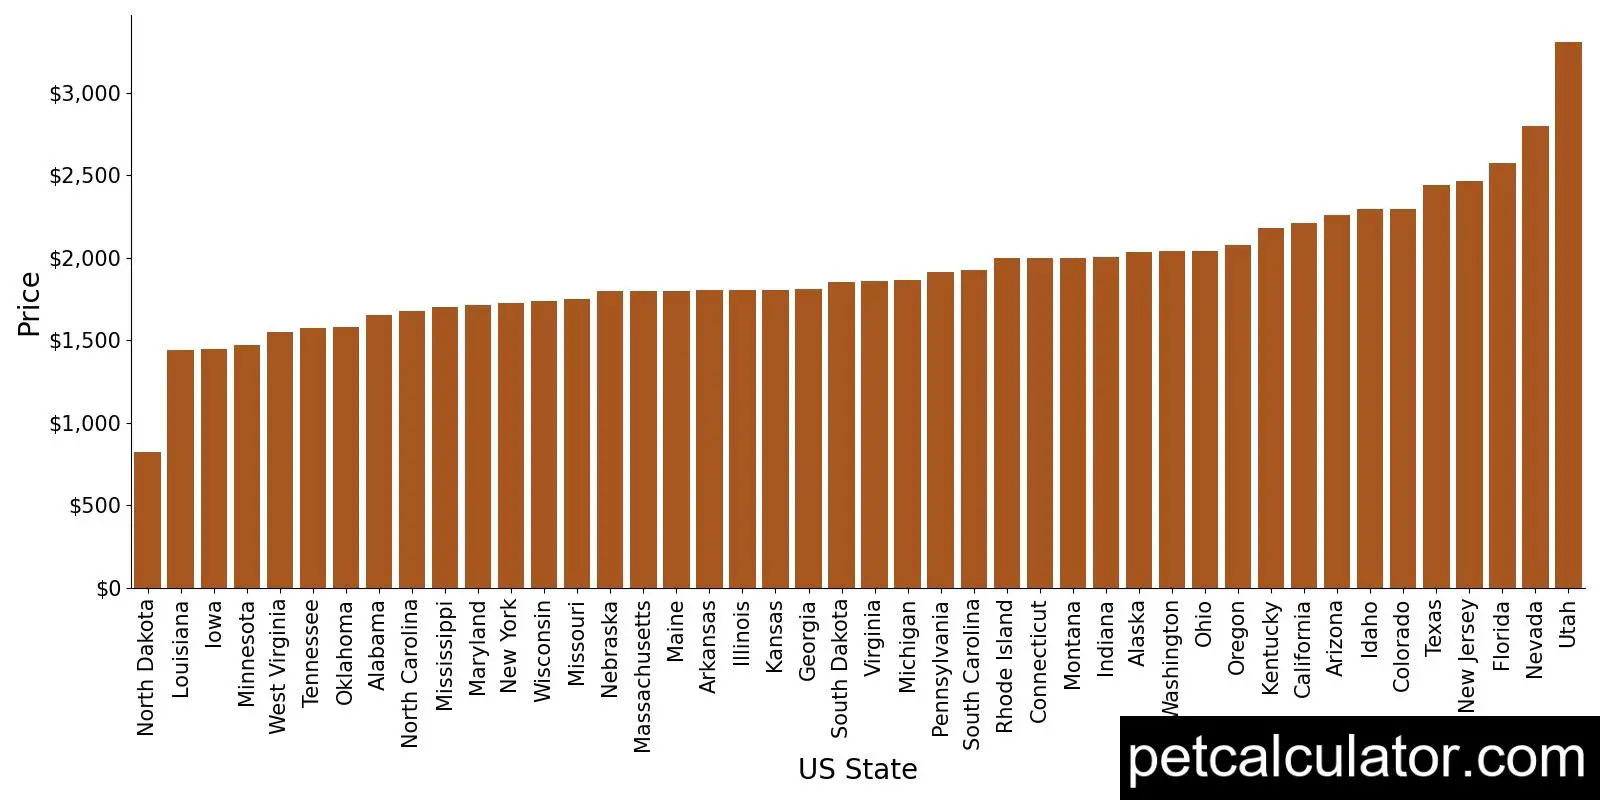 Price of Standard Poodle by US State 